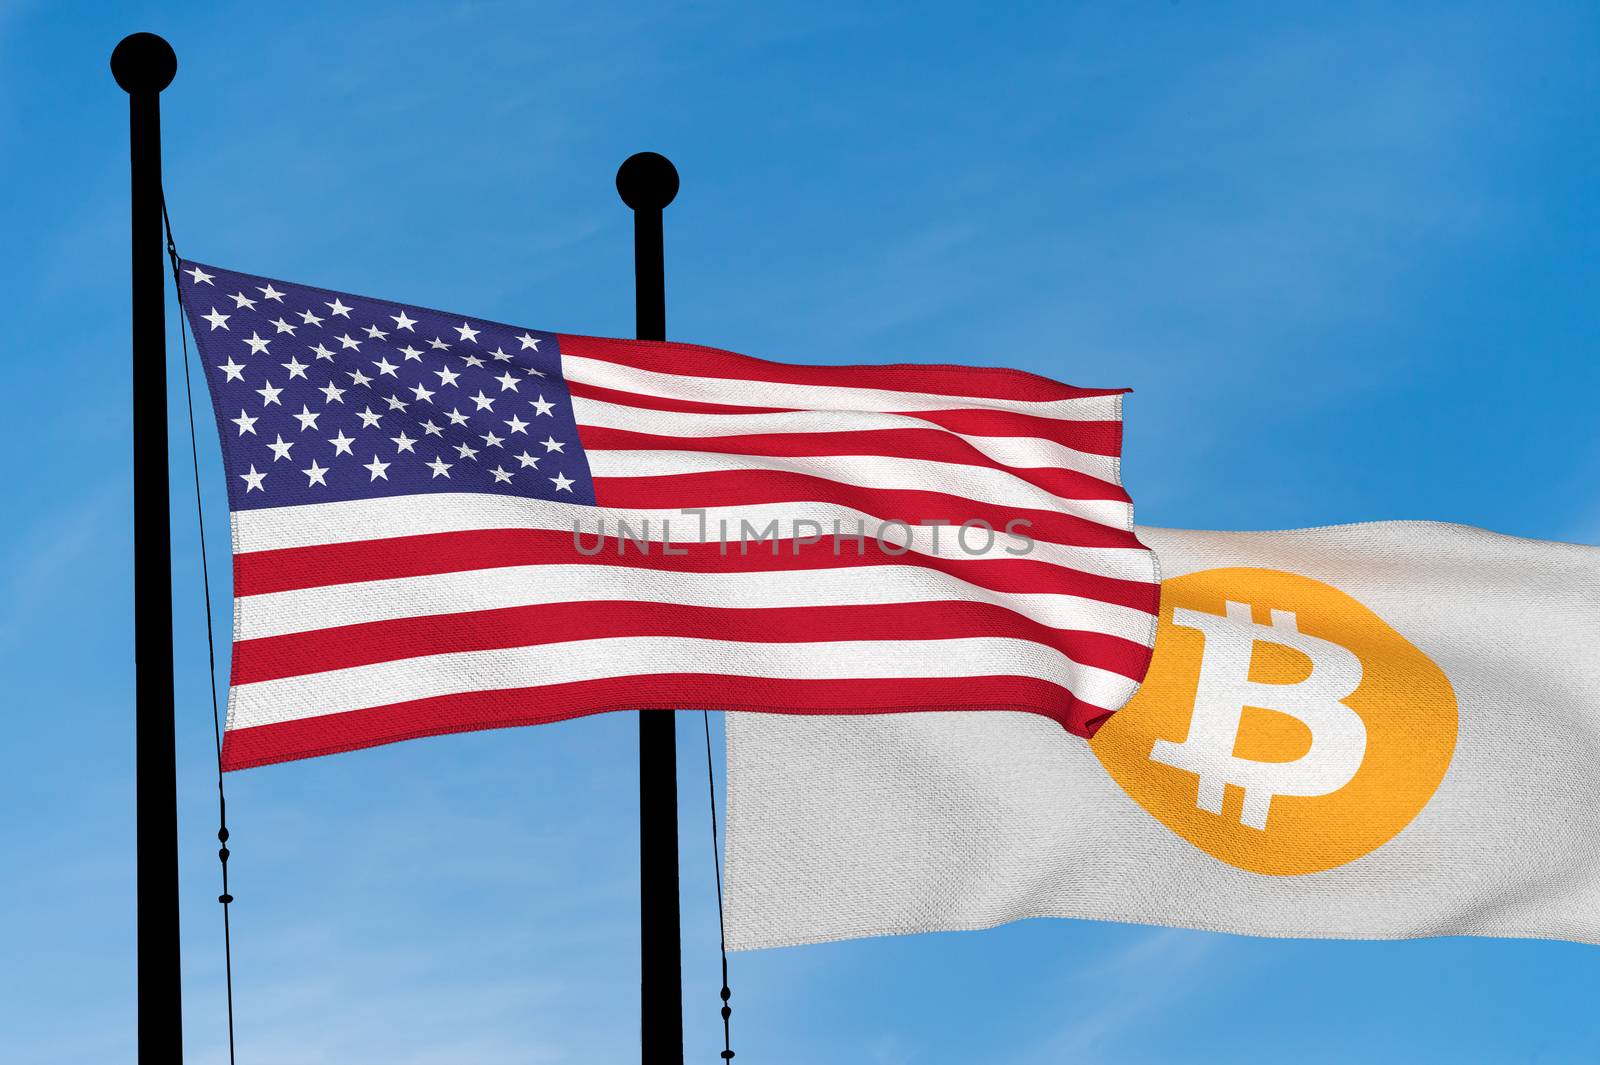 US flag and Bitcoin Flag waving over blue sky (digitally generated image)